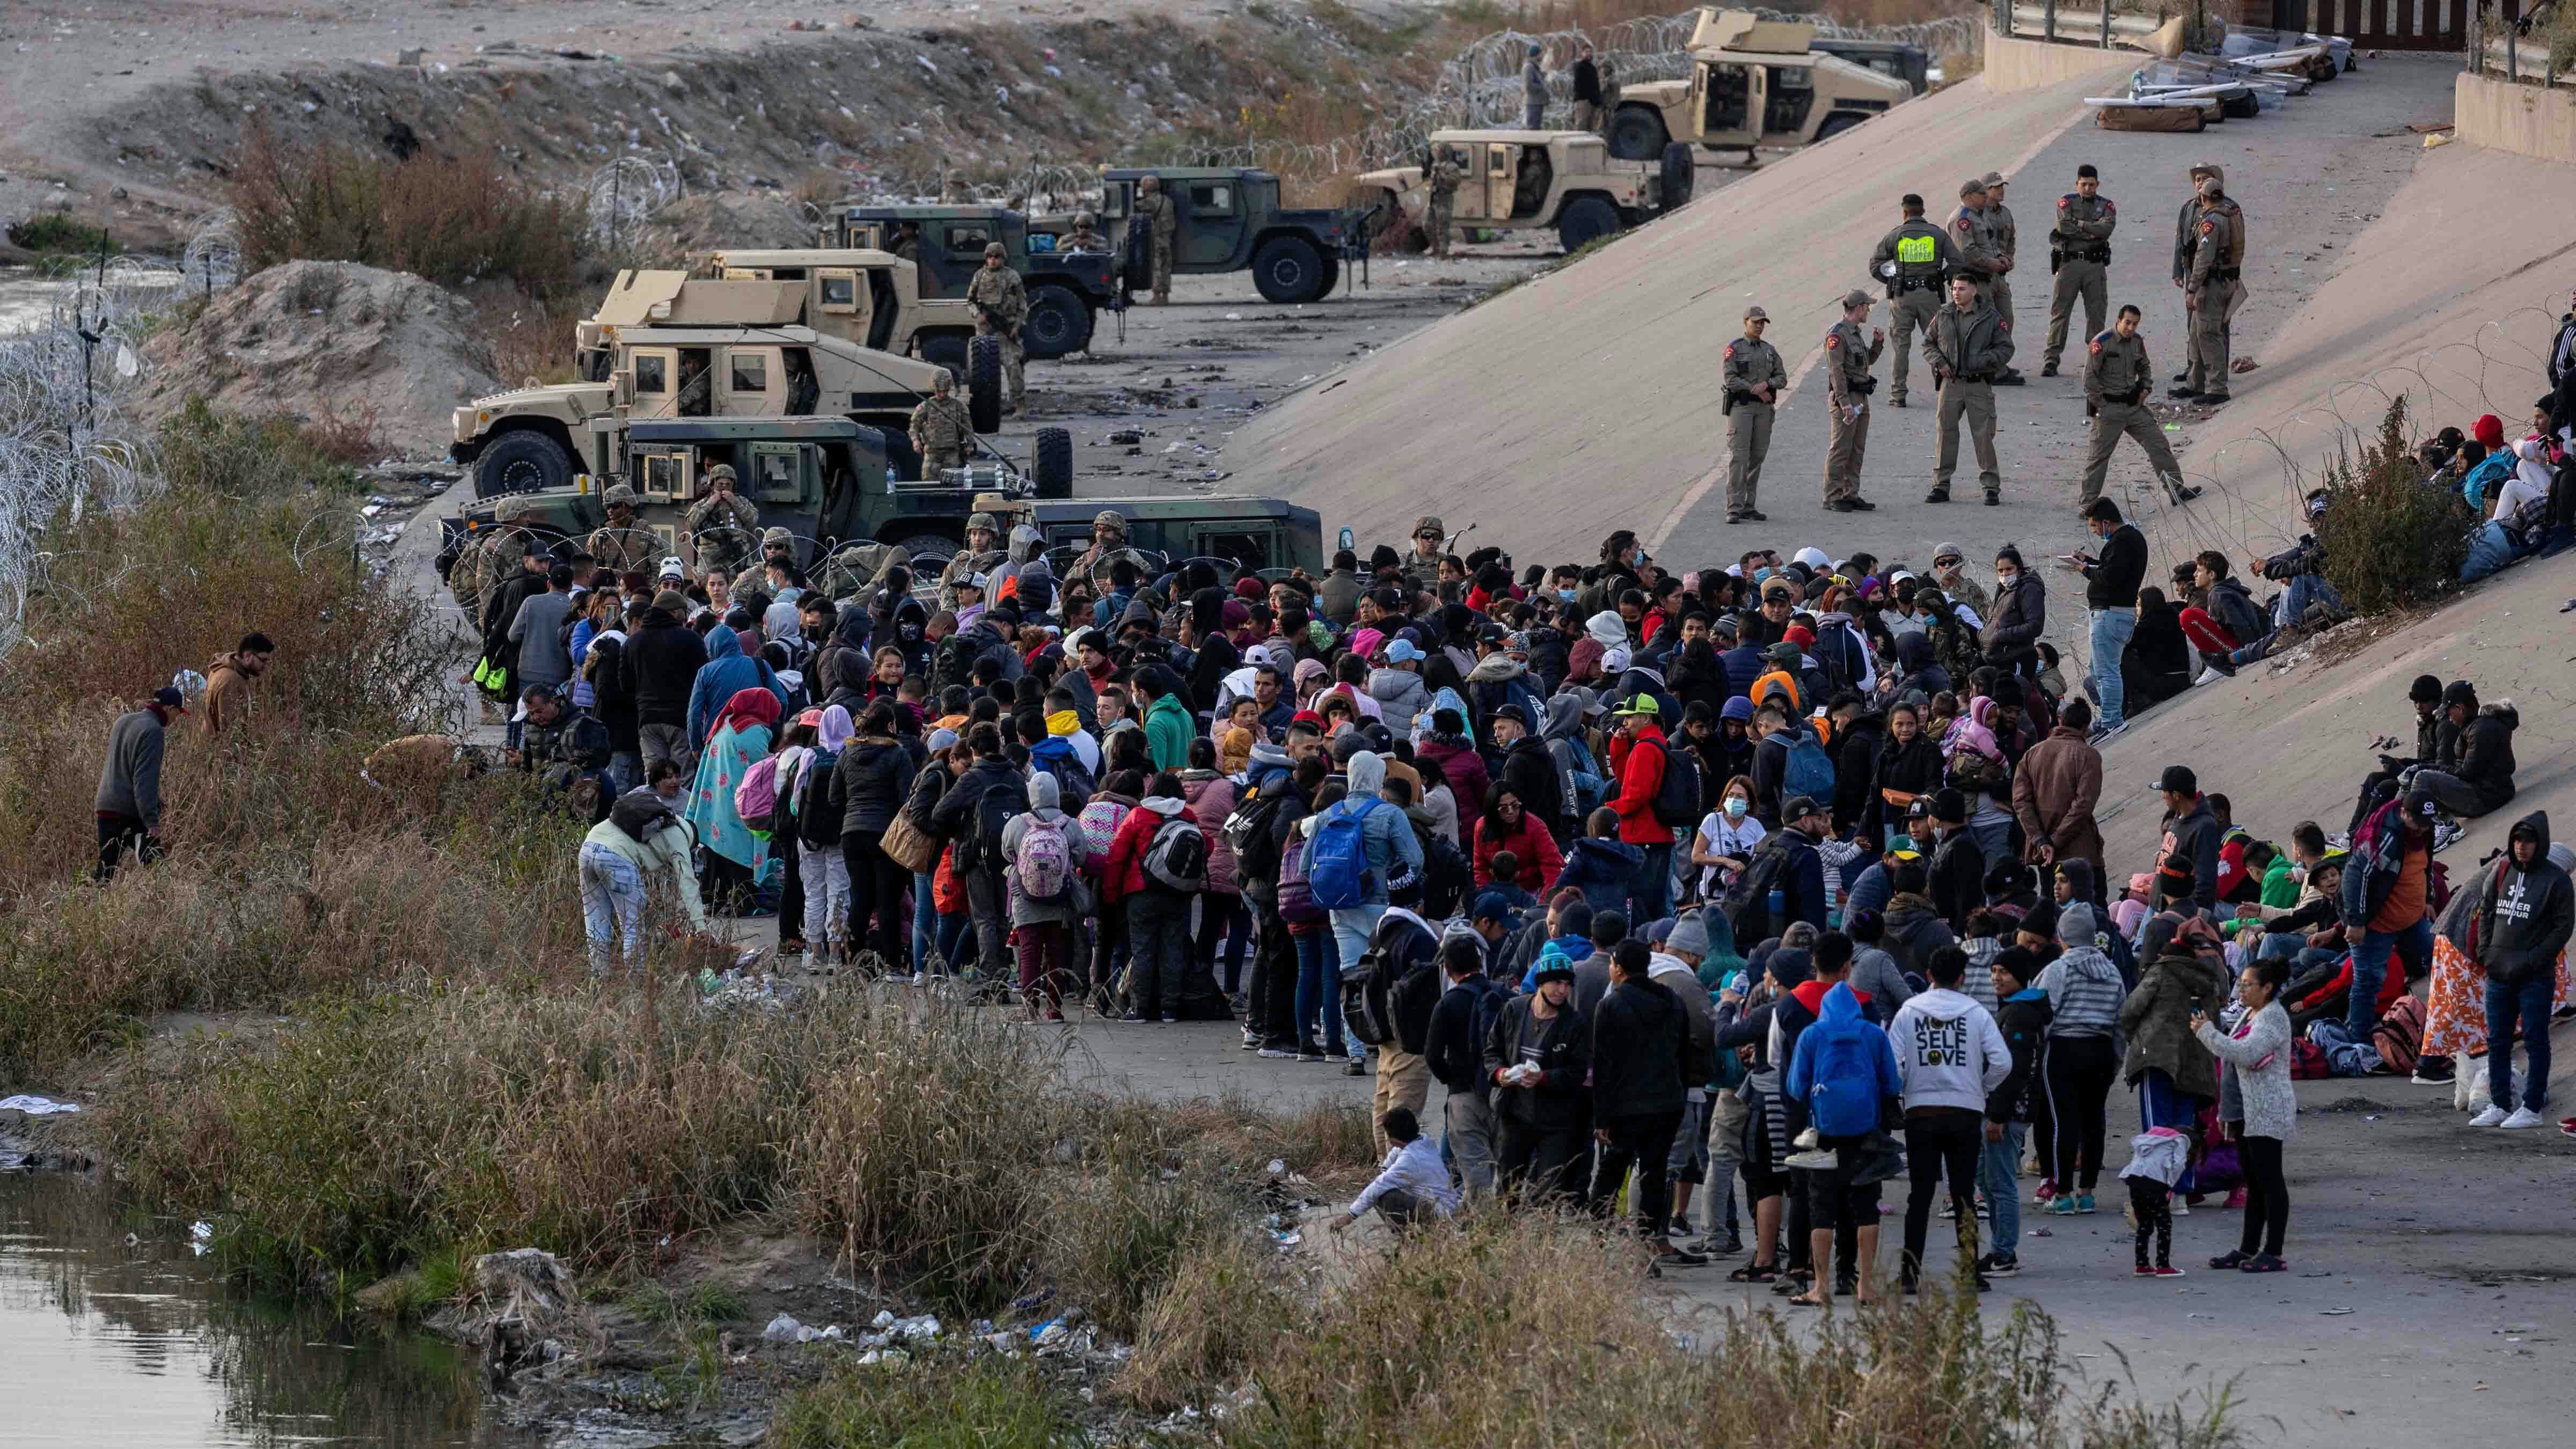 Texas National Guard troops block immigrants from entering a high-traffic border crossing area along Rio Grande in El Paso, Texas